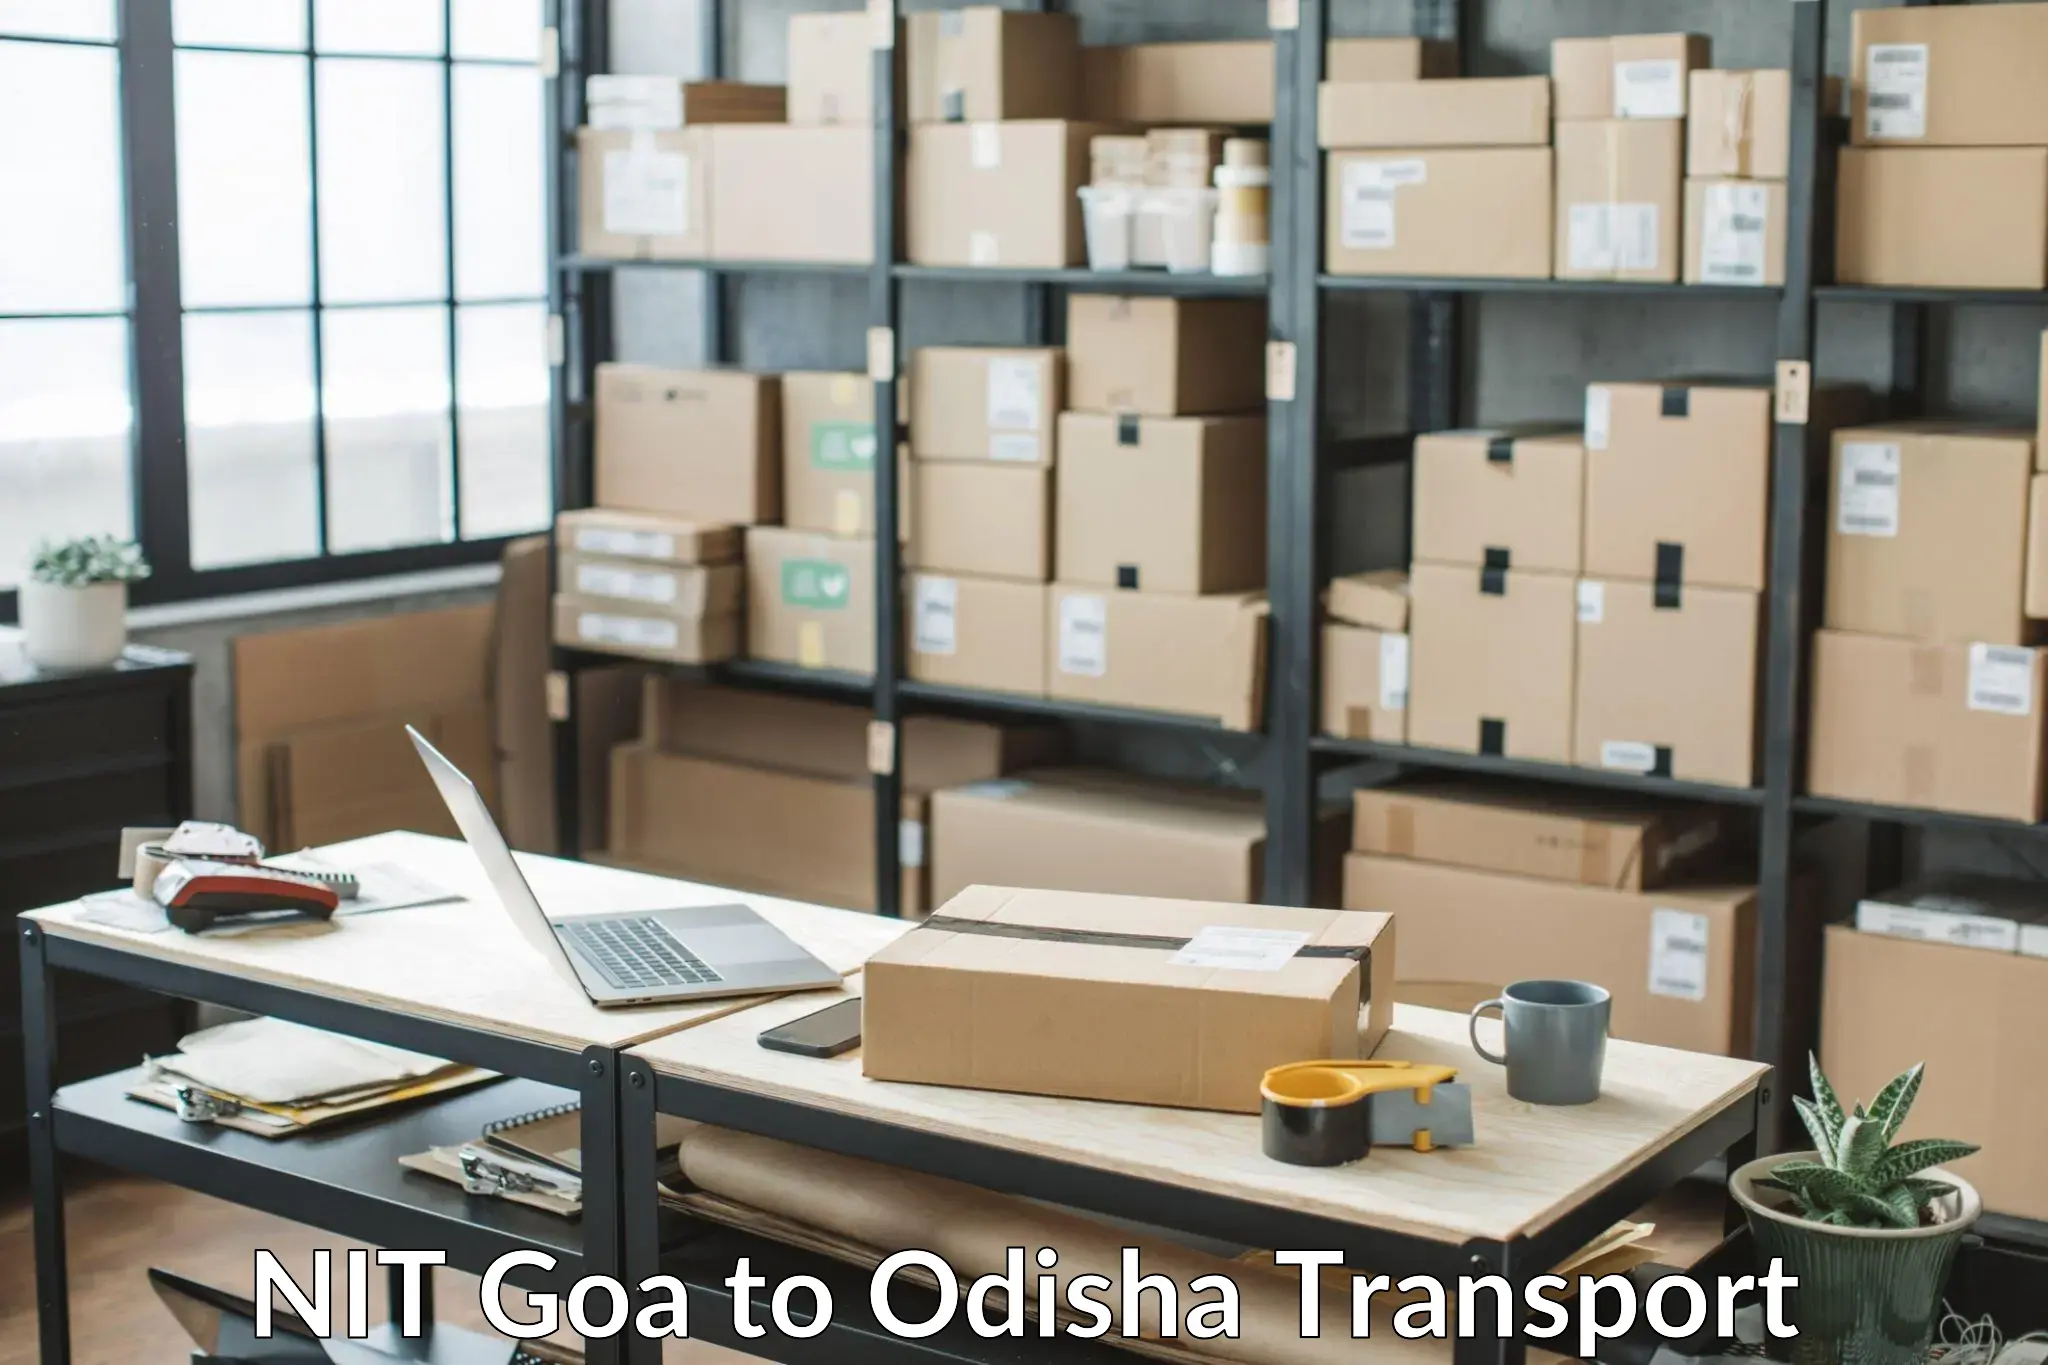 Parcel transport services in NIT Goa to Mathili